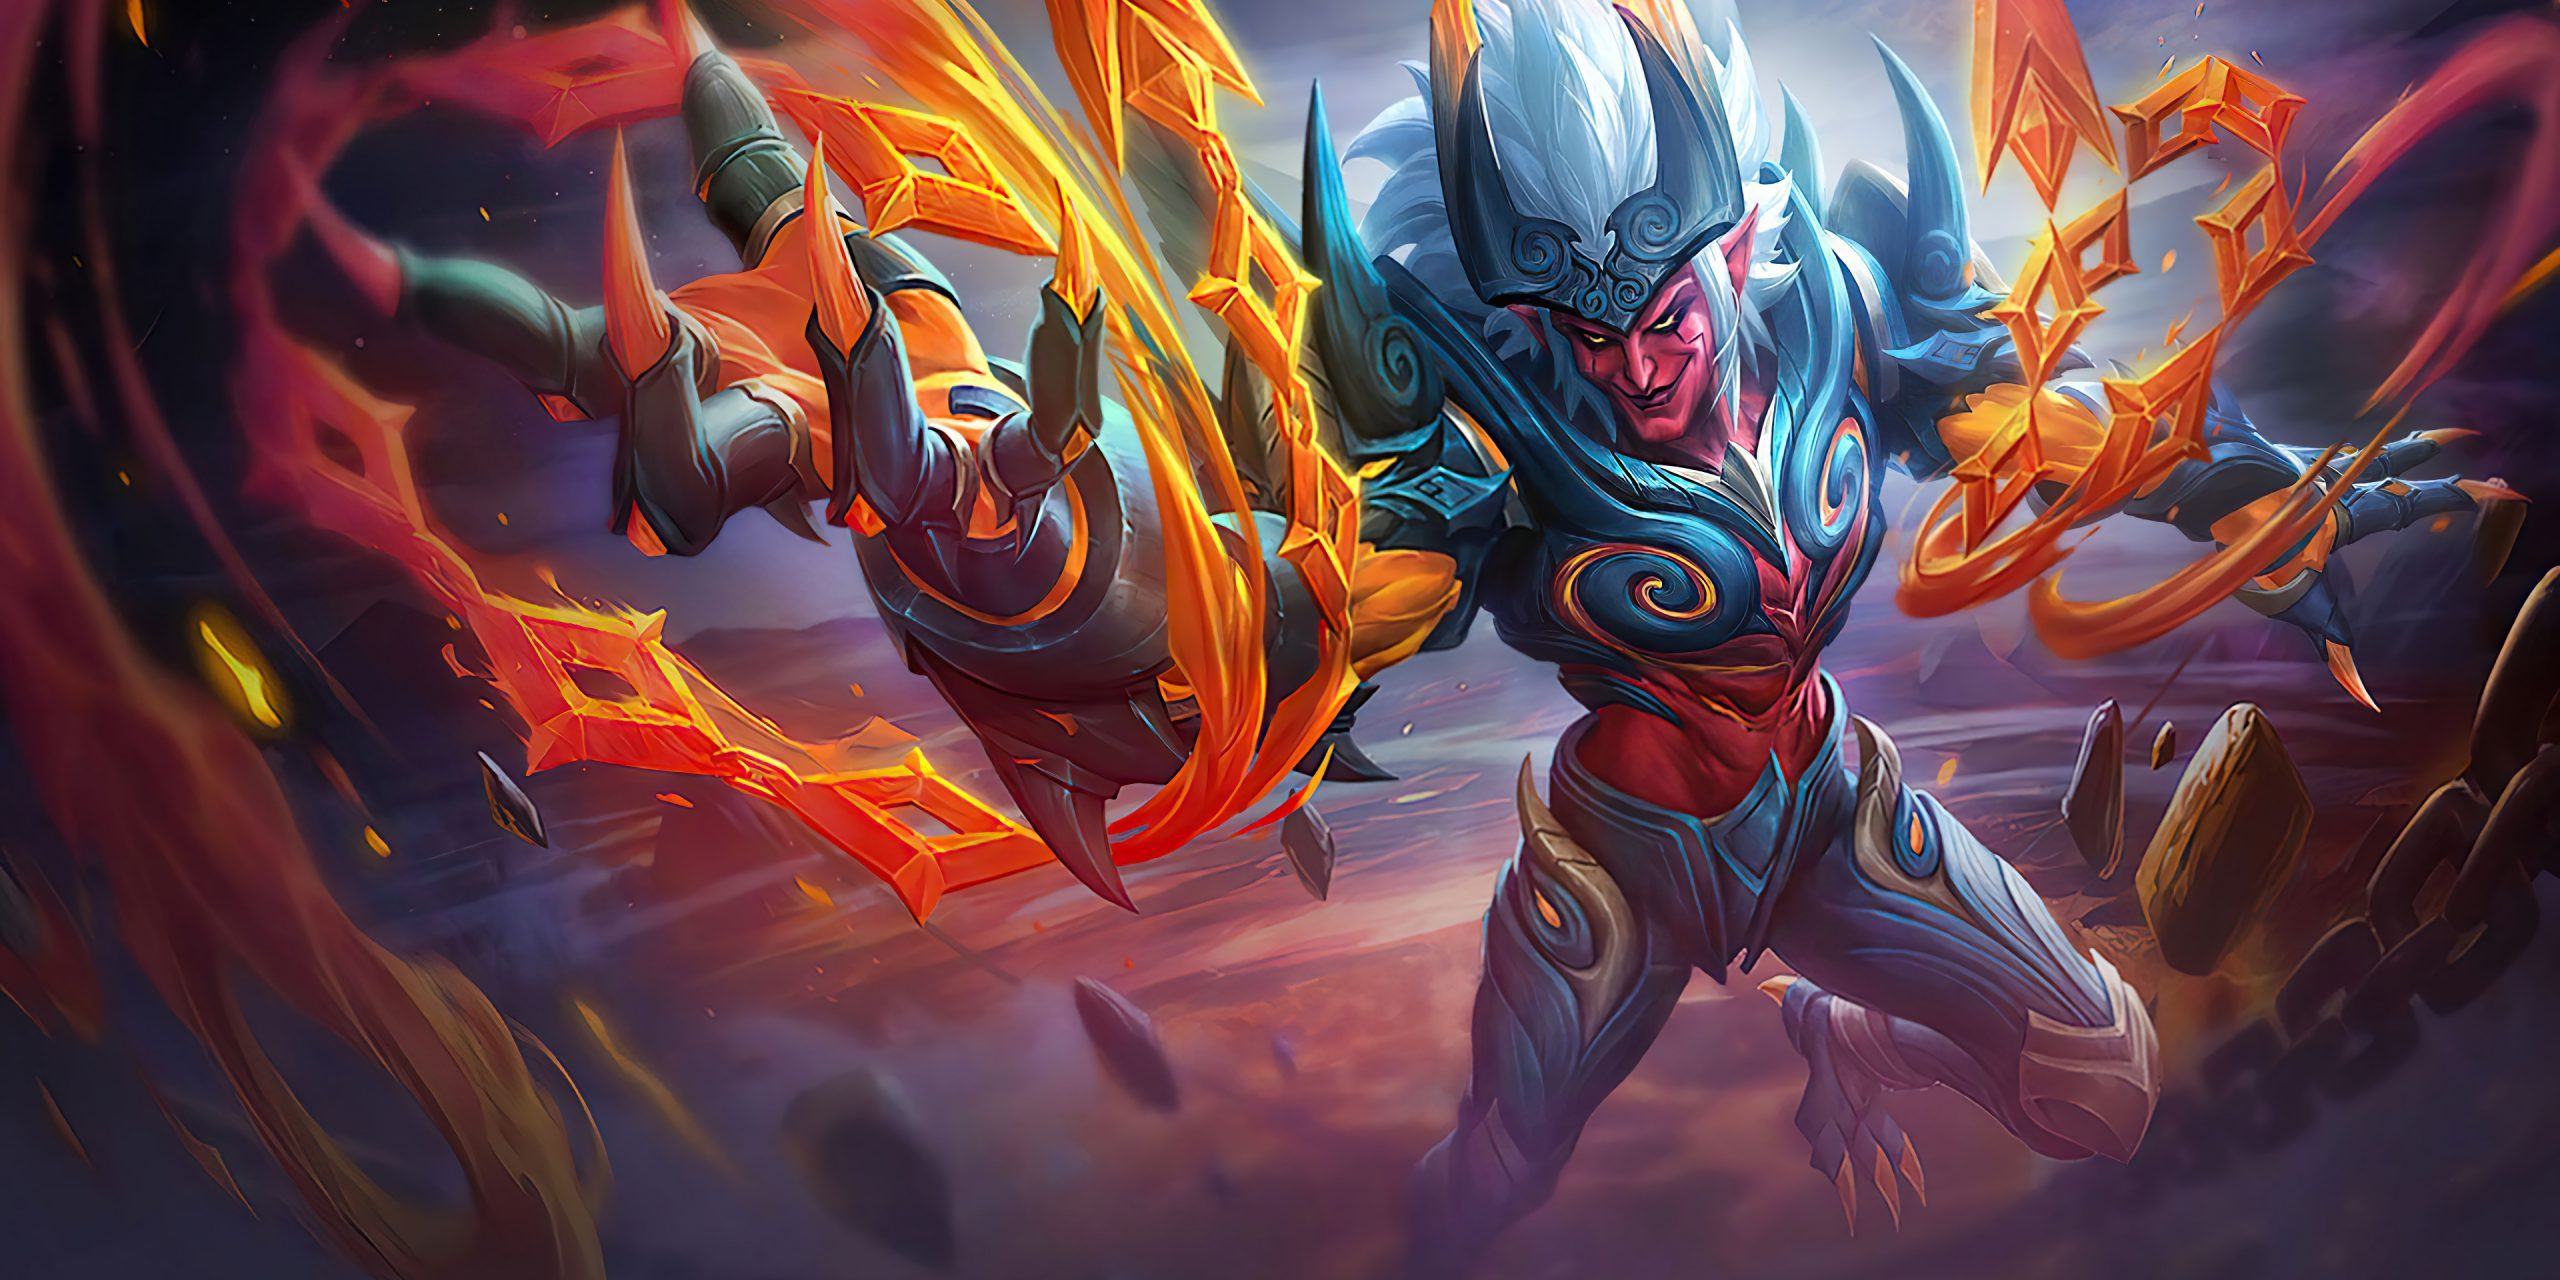 Best Meta Picks for Mobile Legends: Bang Bang to Carry Your Team/Push Ranks Quickly